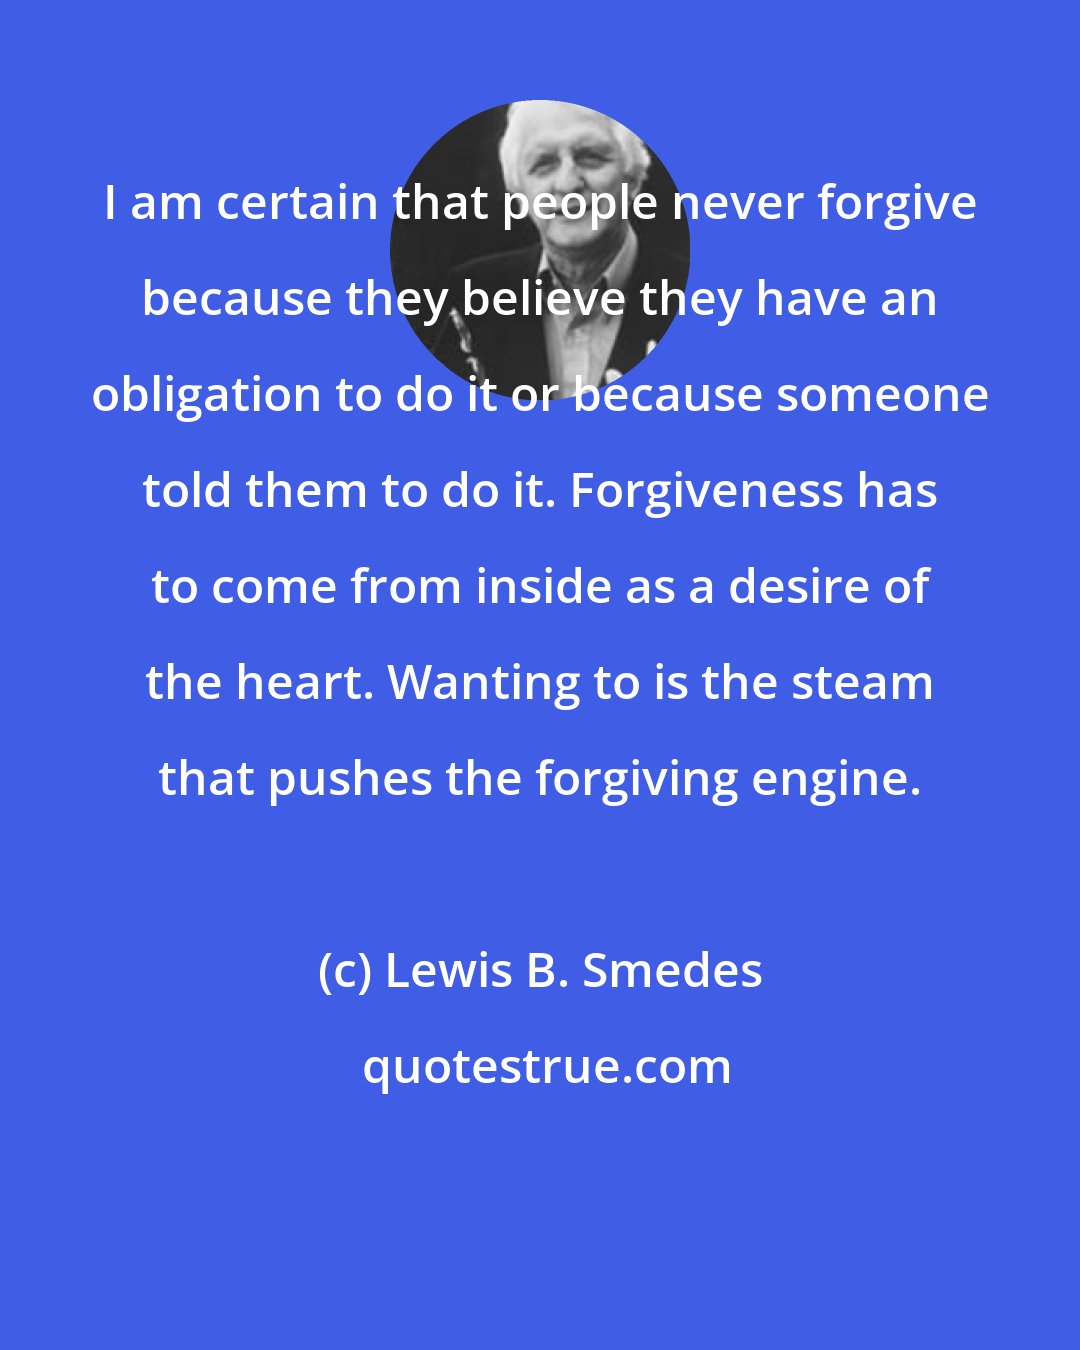 Lewis B. Smedes: I am certain that people never forgive because they believe they have an obligation to do it or because someone told them to do it. Forgiveness has to come from inside as a desire of the heart. Wanting to is the steam that pushes the forgiving engine.